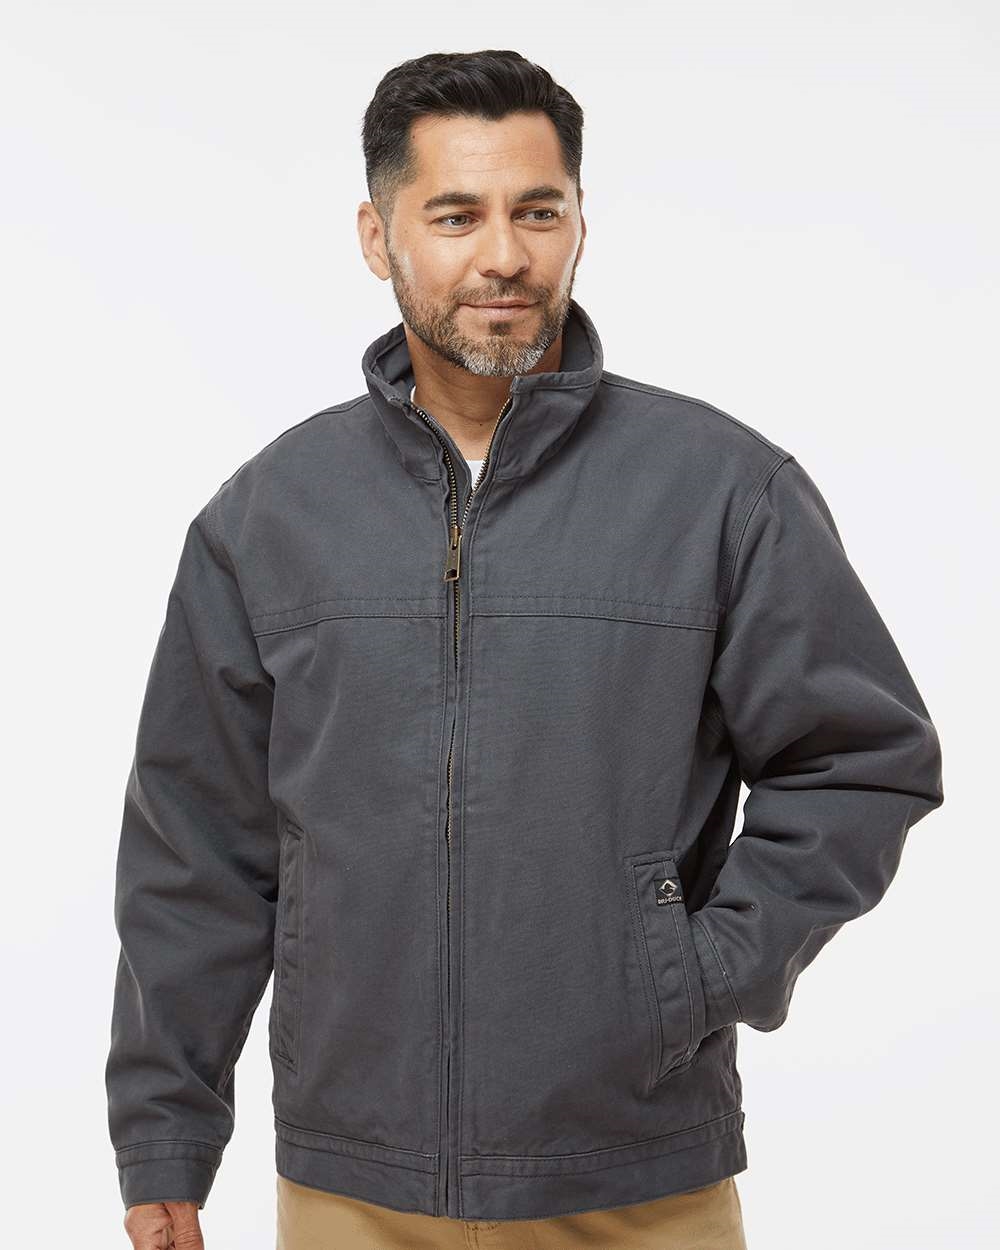 Dri Duck MAVERICK Quarry Wash Canvas with Blanket Lining Jackets 5028.  Embroidery available. Quantity Discounts. Same